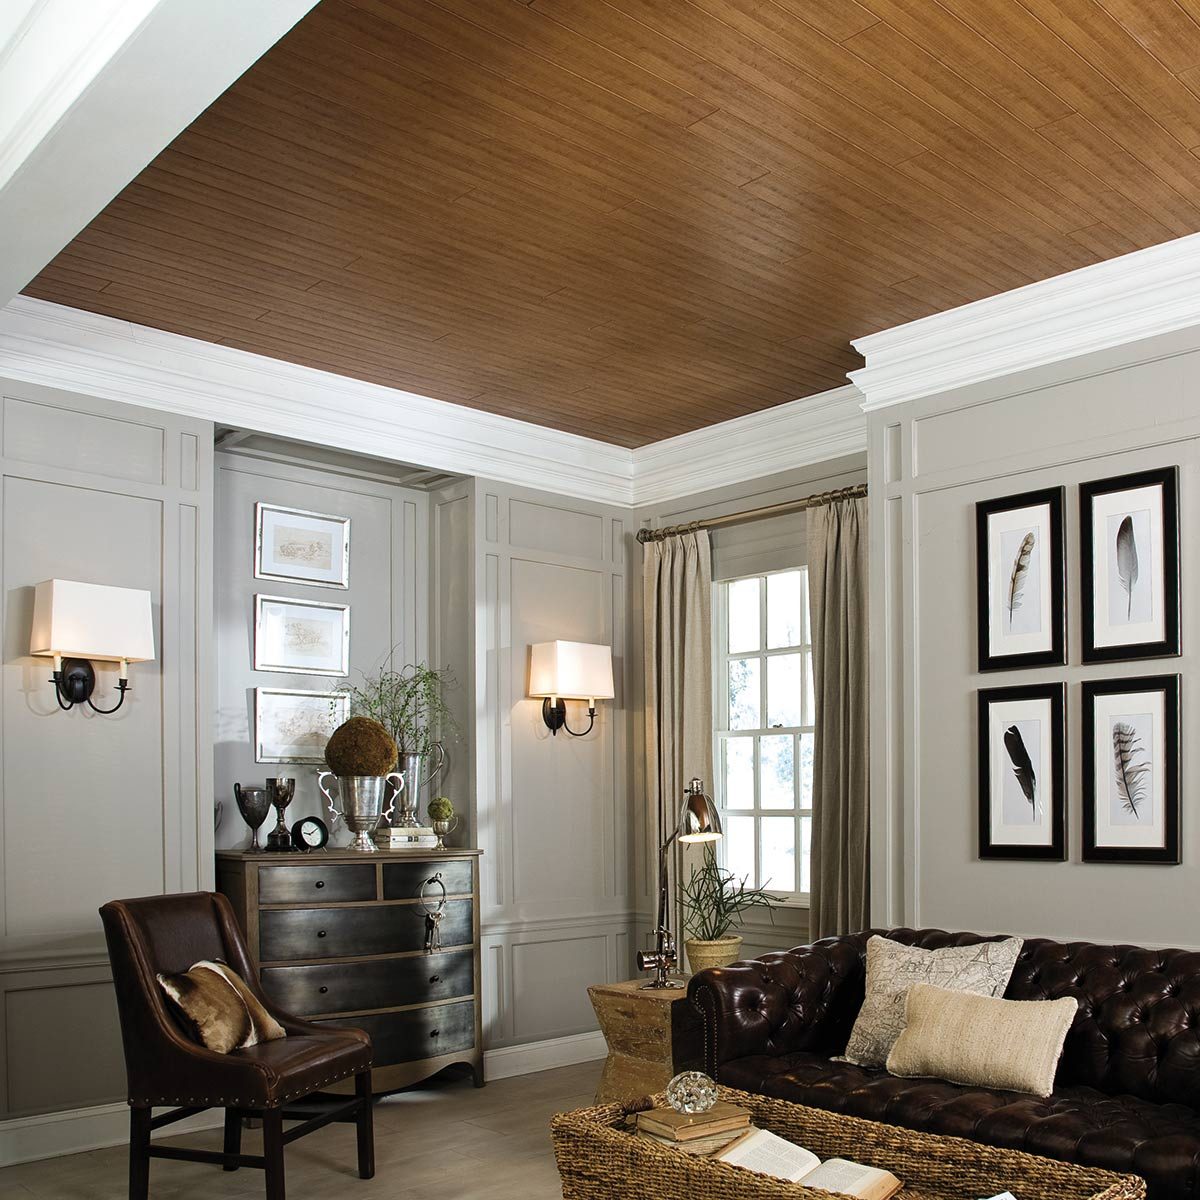 Using Wood Look Planks to Cover an Unappealing Ceiling